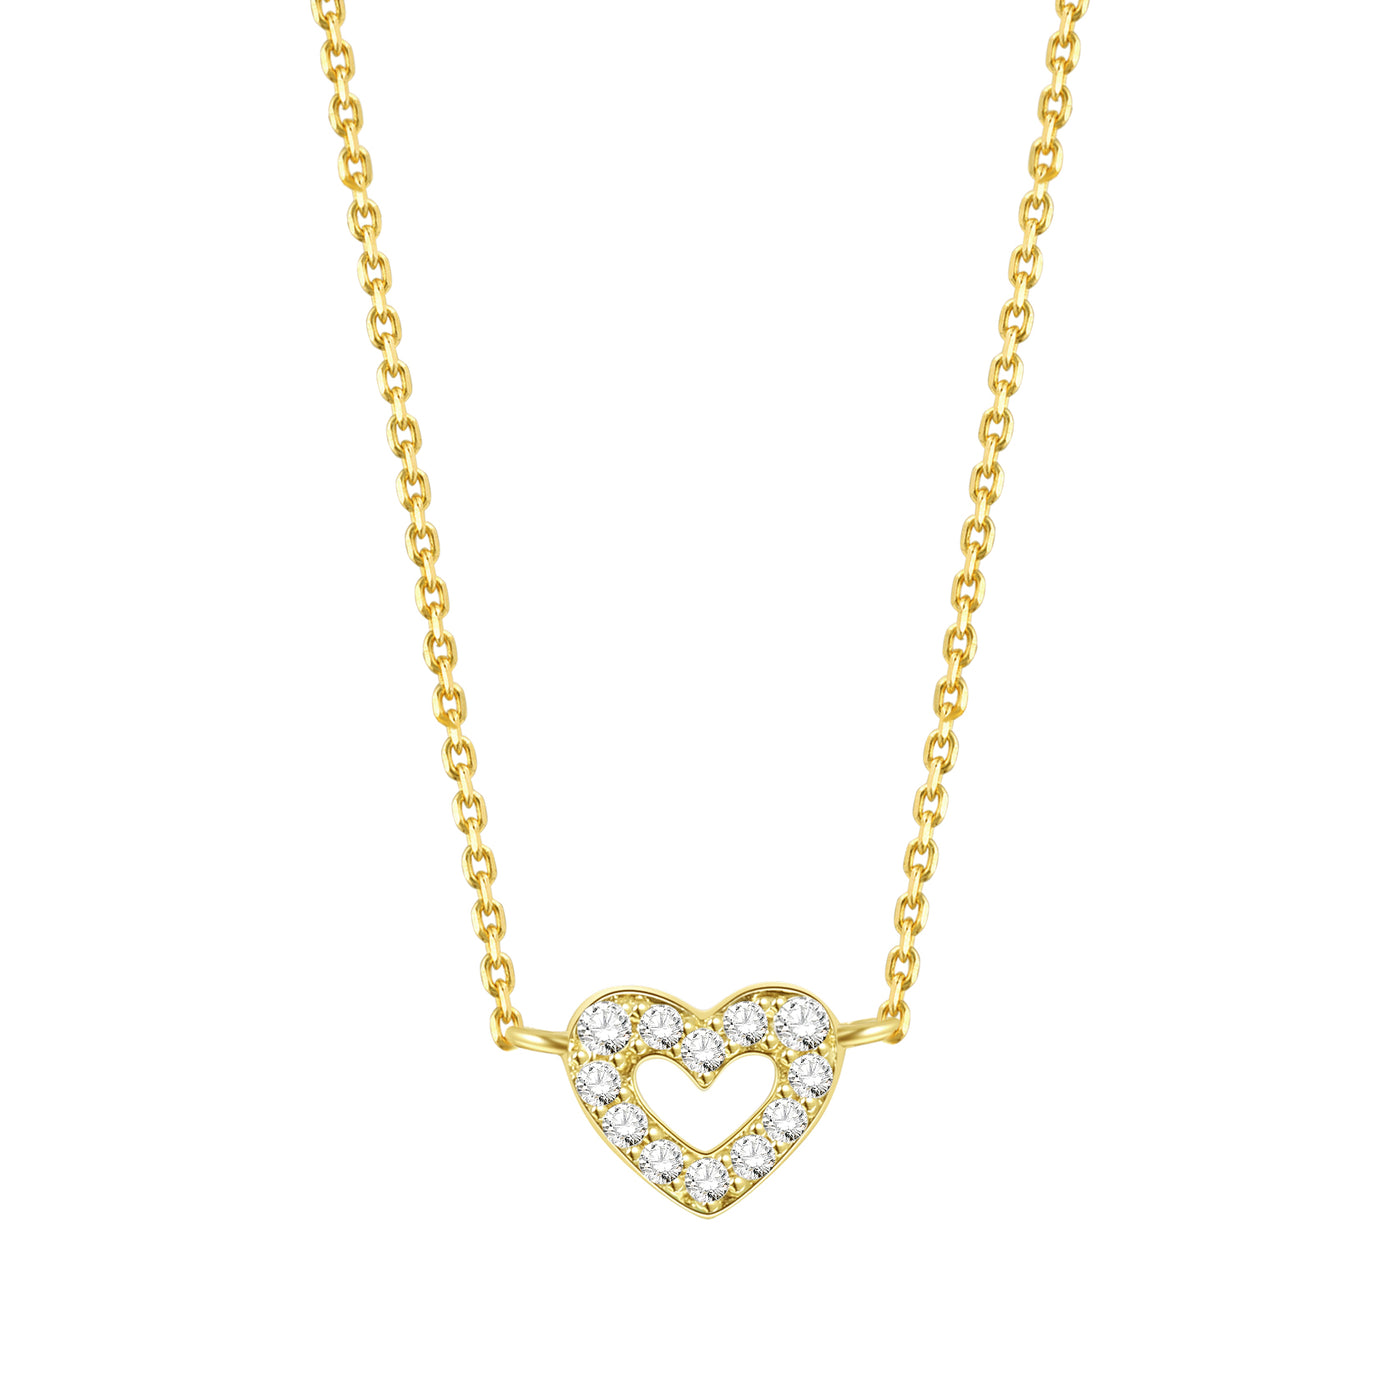 Amore Heart Pendant Necklace 14K Gold